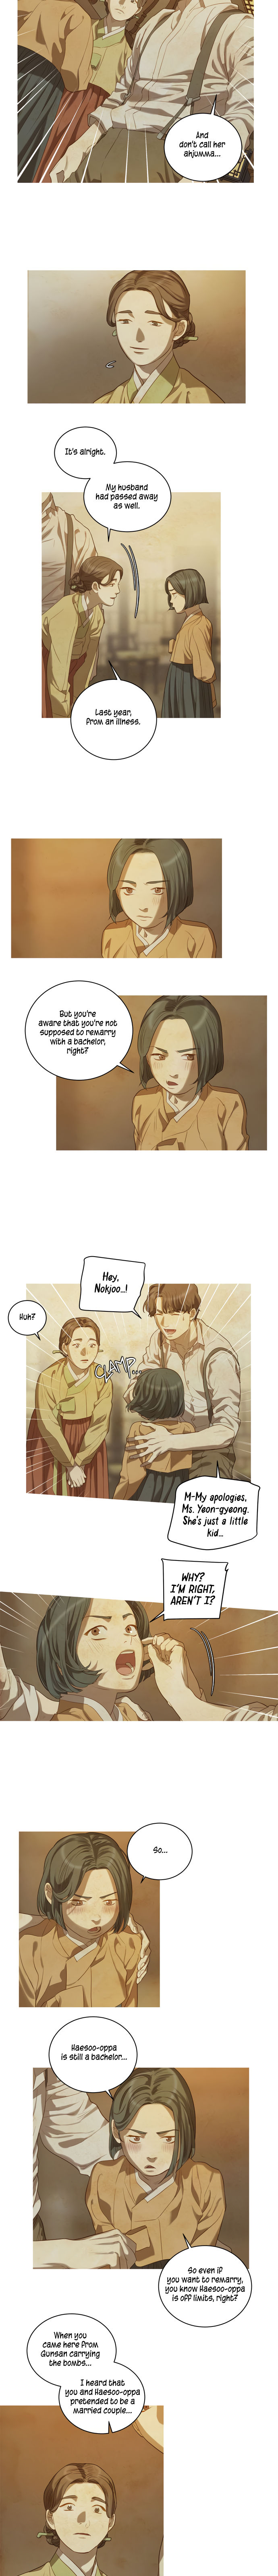 Gorae Byul - The Gyeongseong Mermaid - Chapter 14 Page 9